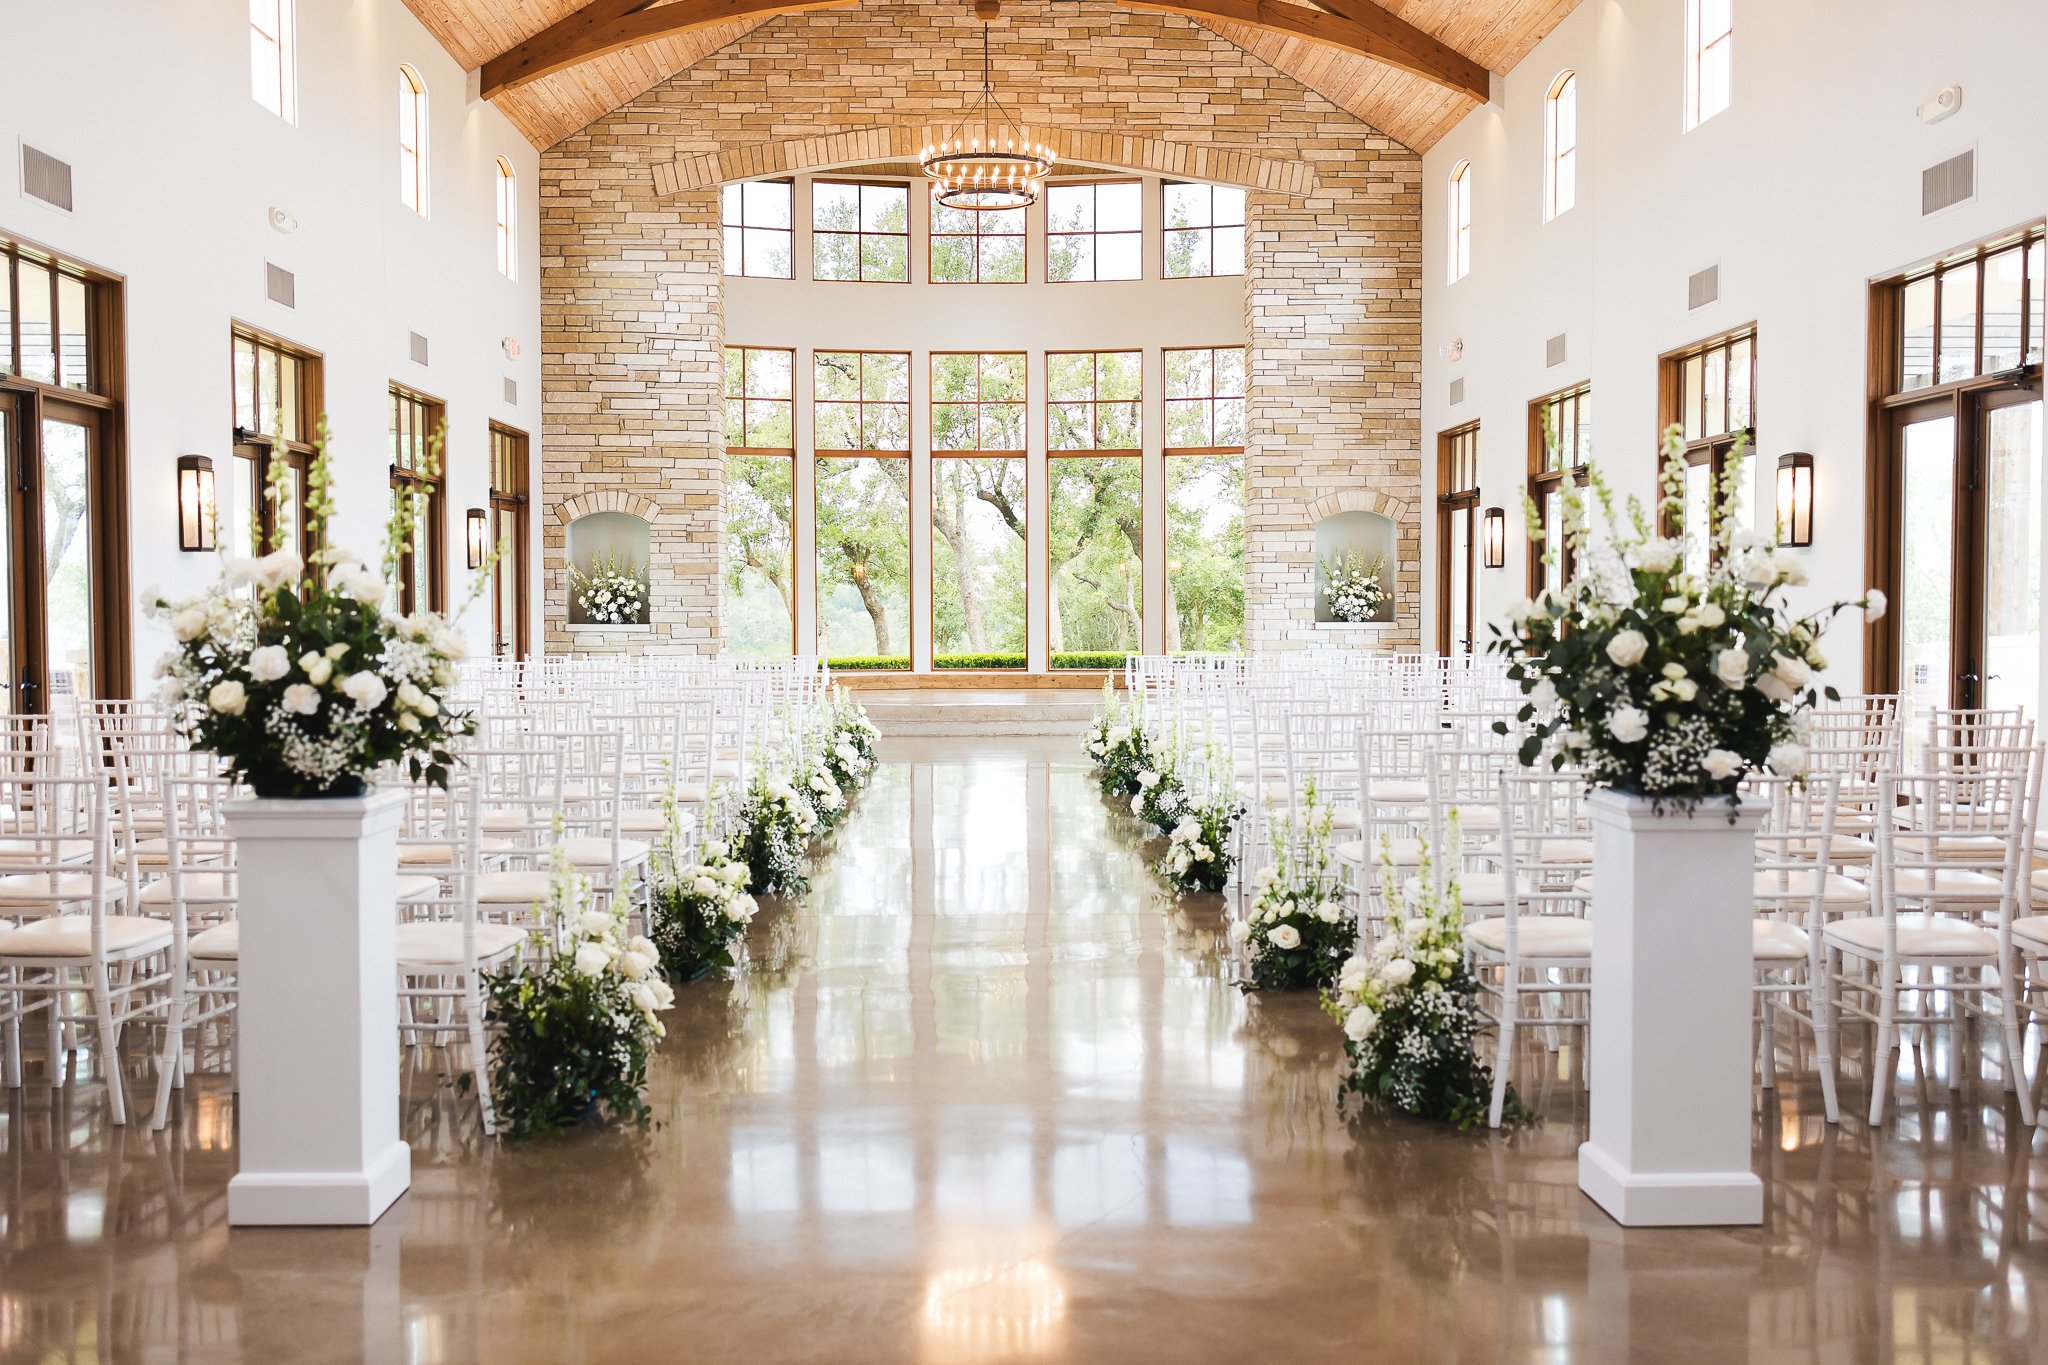 Step into a world of ethereal elegance at our light and airy wedding venues. Your fairytale wedding begins here.